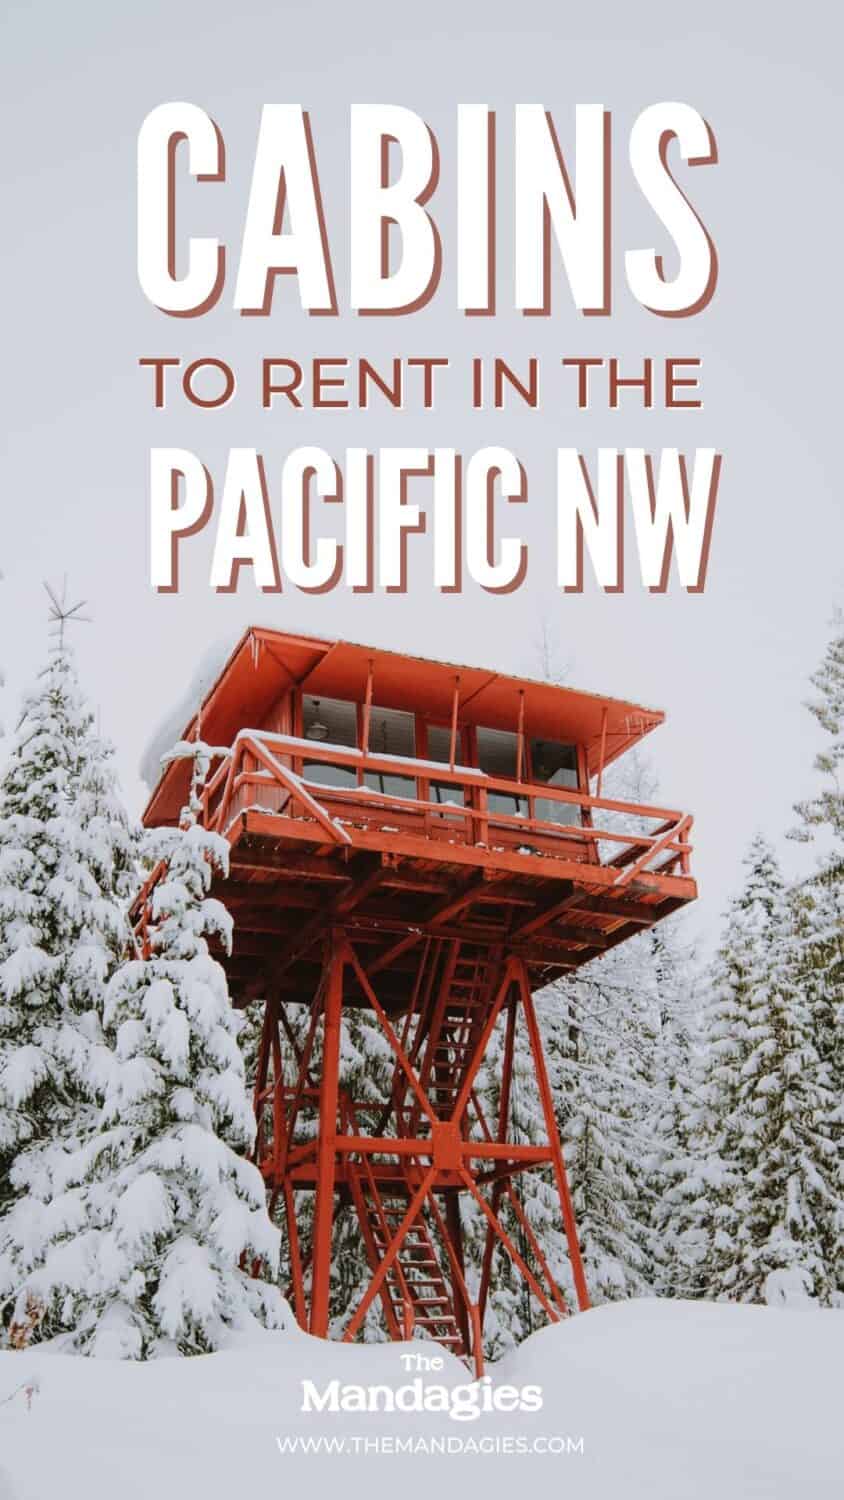 Looking for a cozy getaway this season? We're sharing the best Pacific Northwest cabins for rent, from tiny homes, treehouses, cozy cabins and more! #cabins #PNW #pacificNorthwest #cozycabin #sanjuanislands #columbiariver #oregon #washington #idaho #vacationrental #travel #montana #Britishcolumbia #rental #cabin